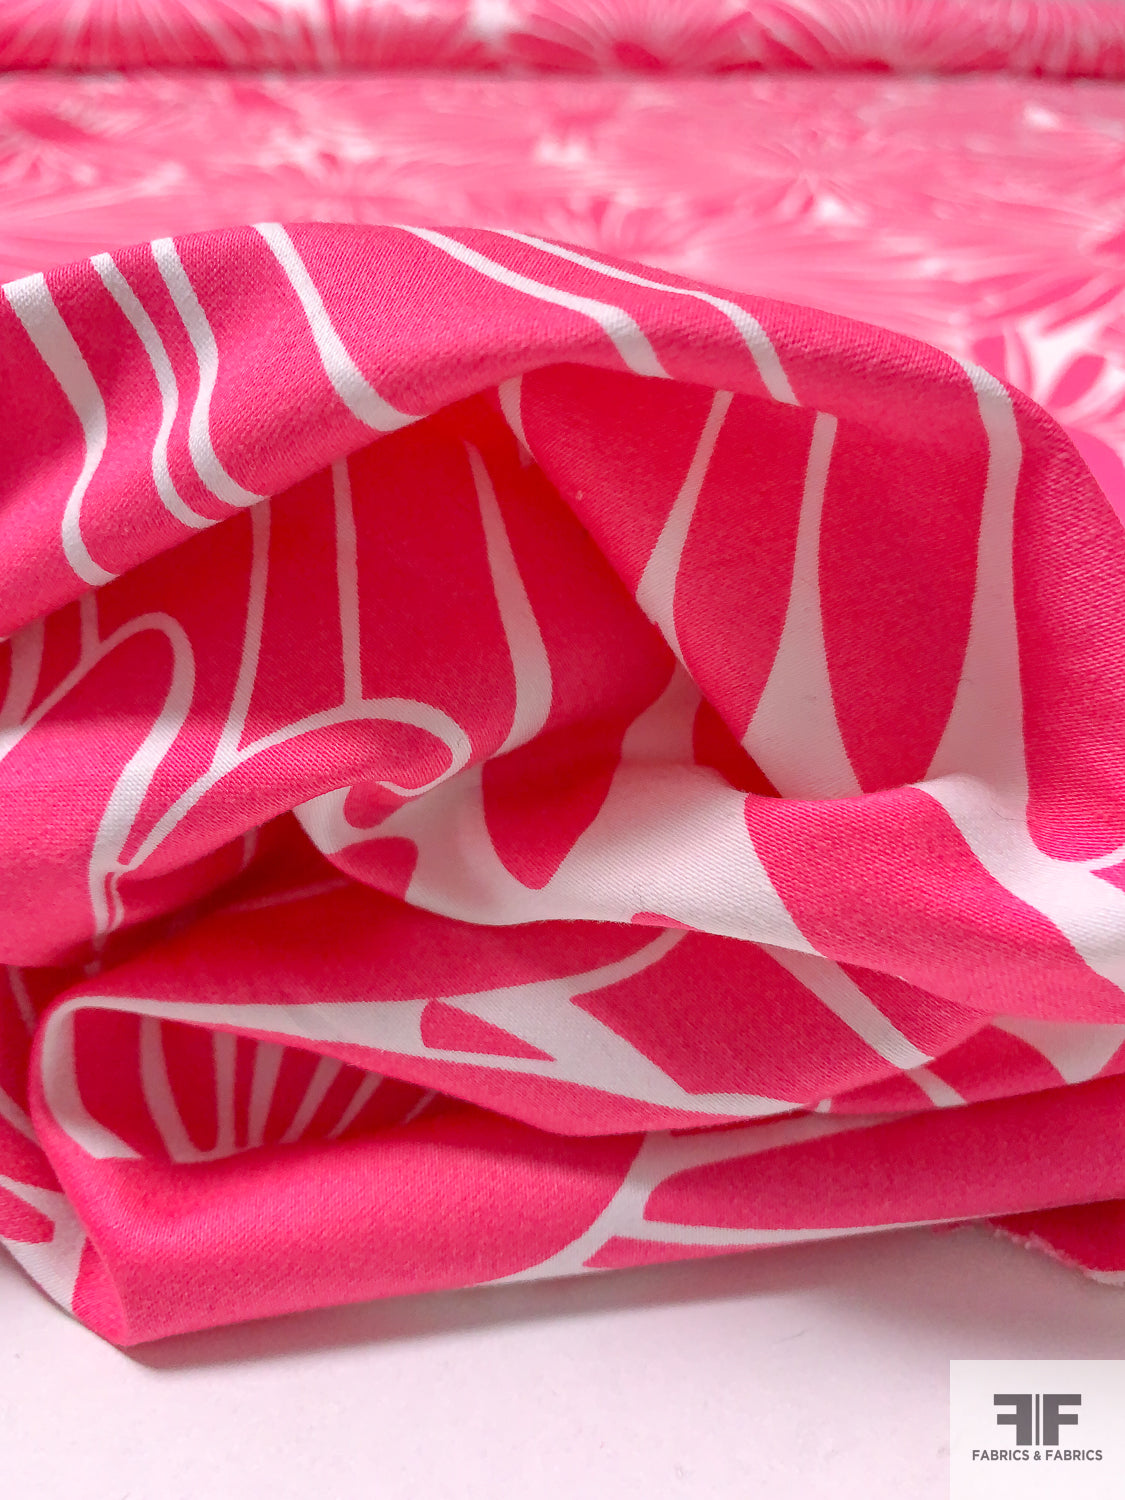 Large-Scale Floral Graphic Printed Stretch Fine Cotton Twill - Bright Pink / Off-White